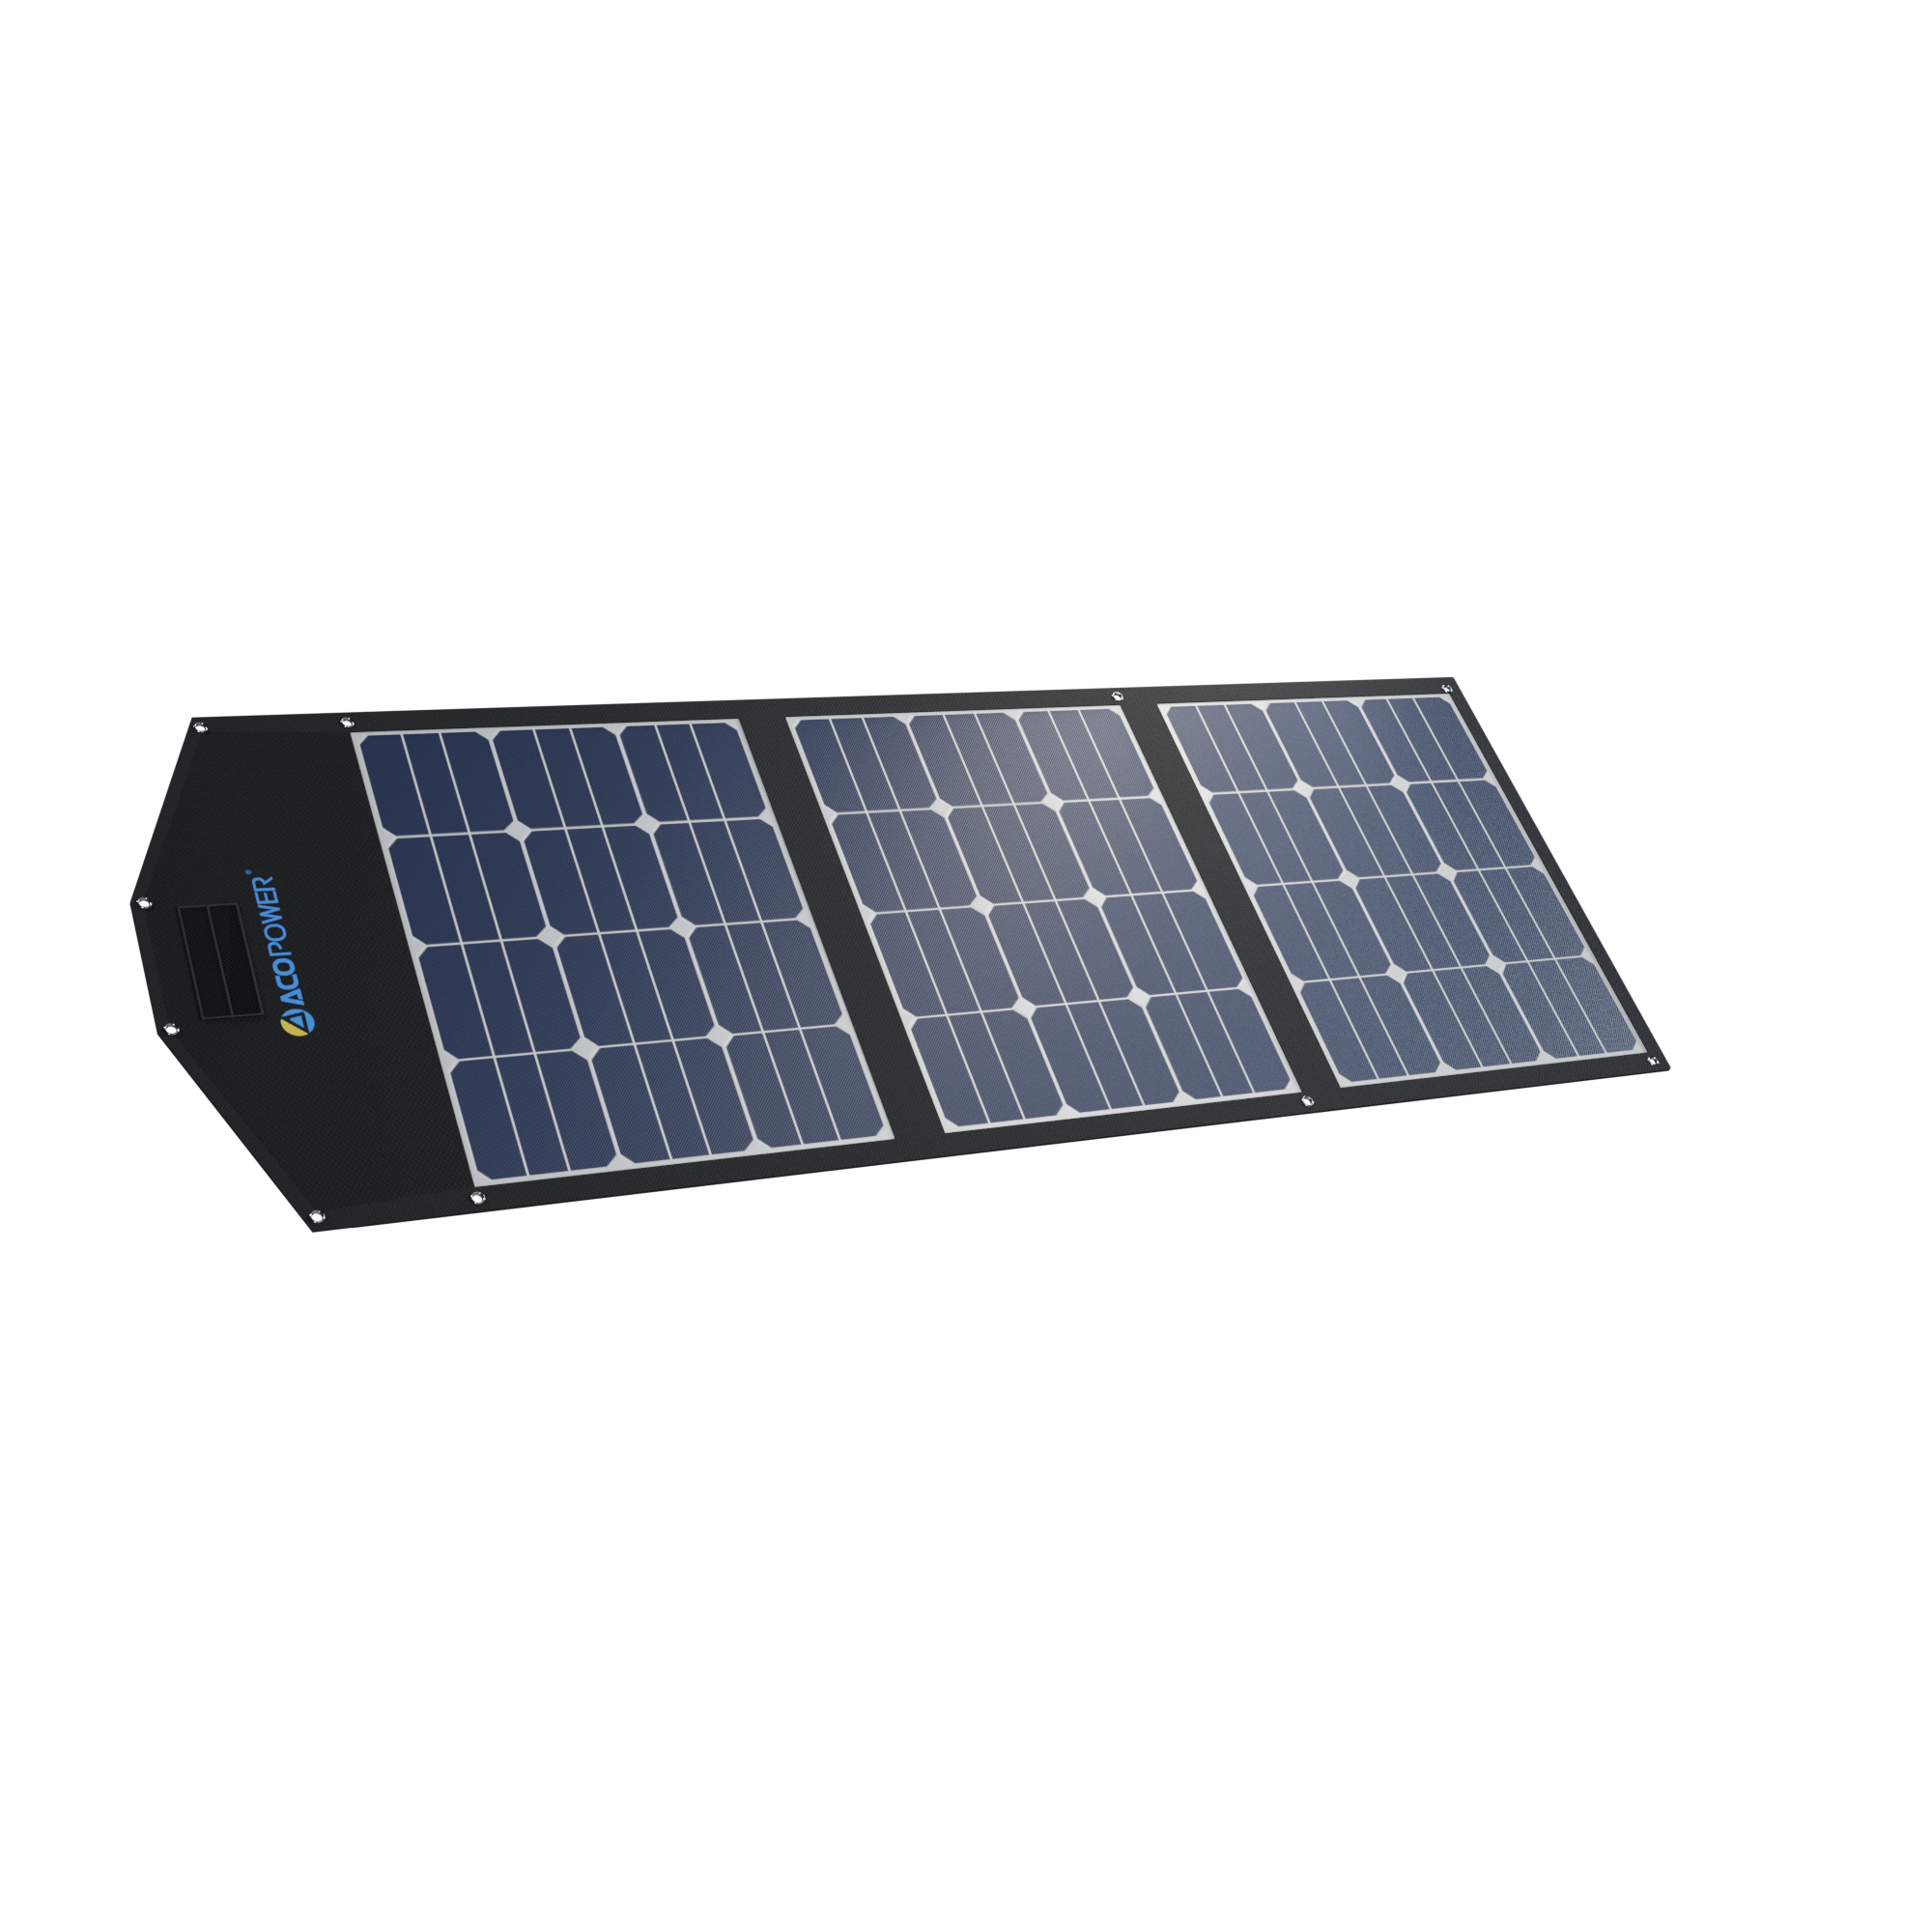 ACOPower Ltk 120W Foldable Solar Panel Kit With Included ProteusX 20A Charge Controller